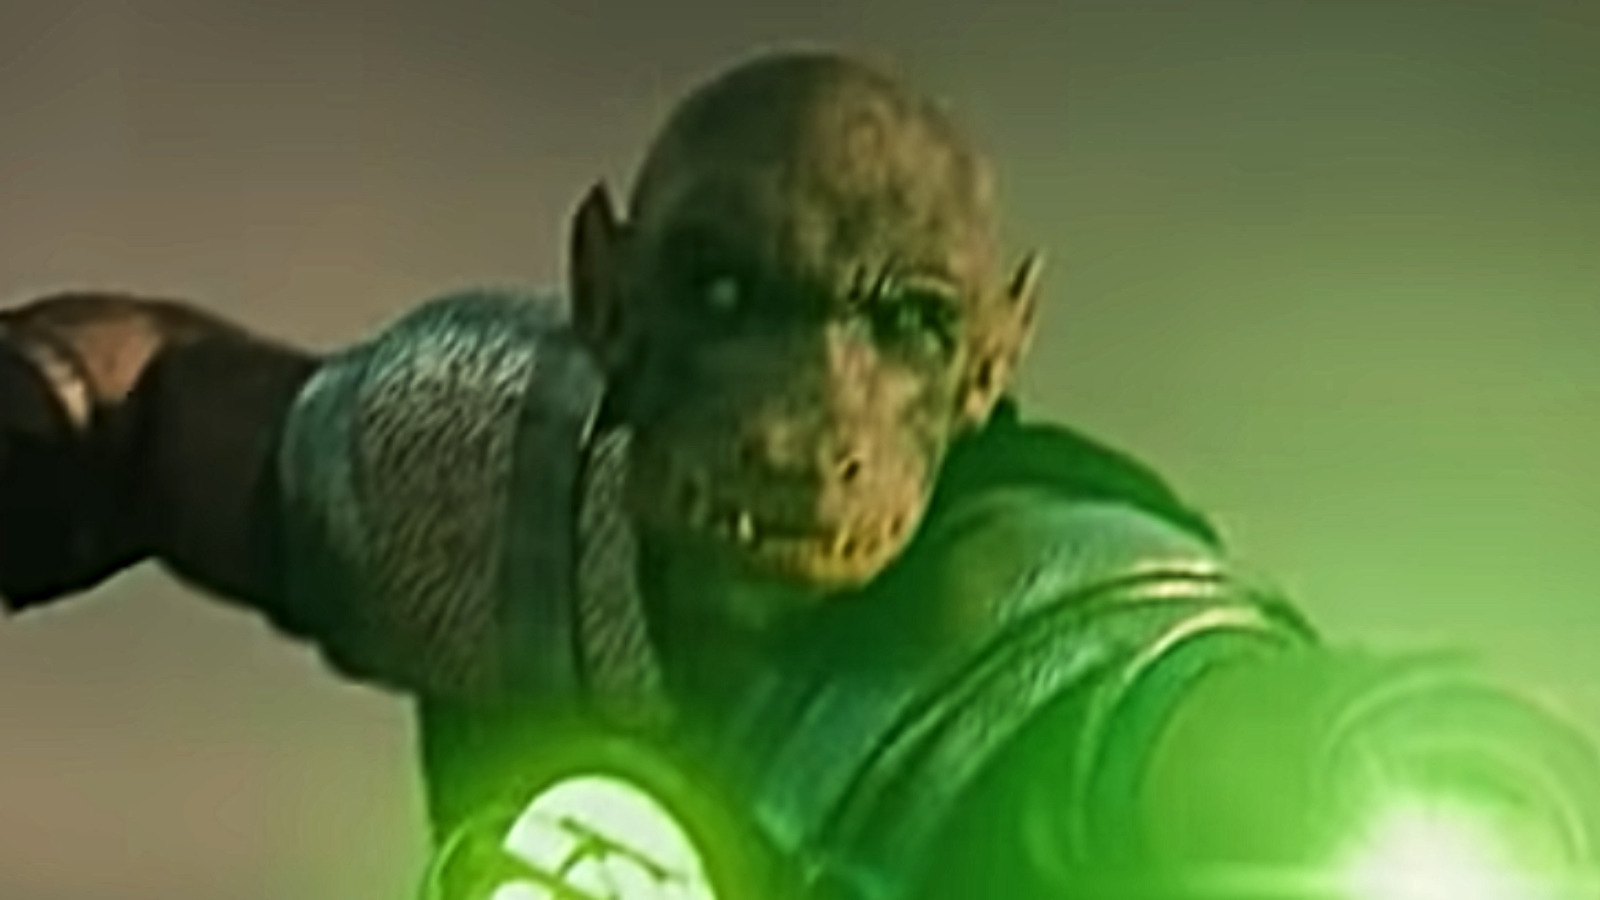 Justice League Snyder Cut Where Did Yalan Gur's Green Lantern Ring Go?